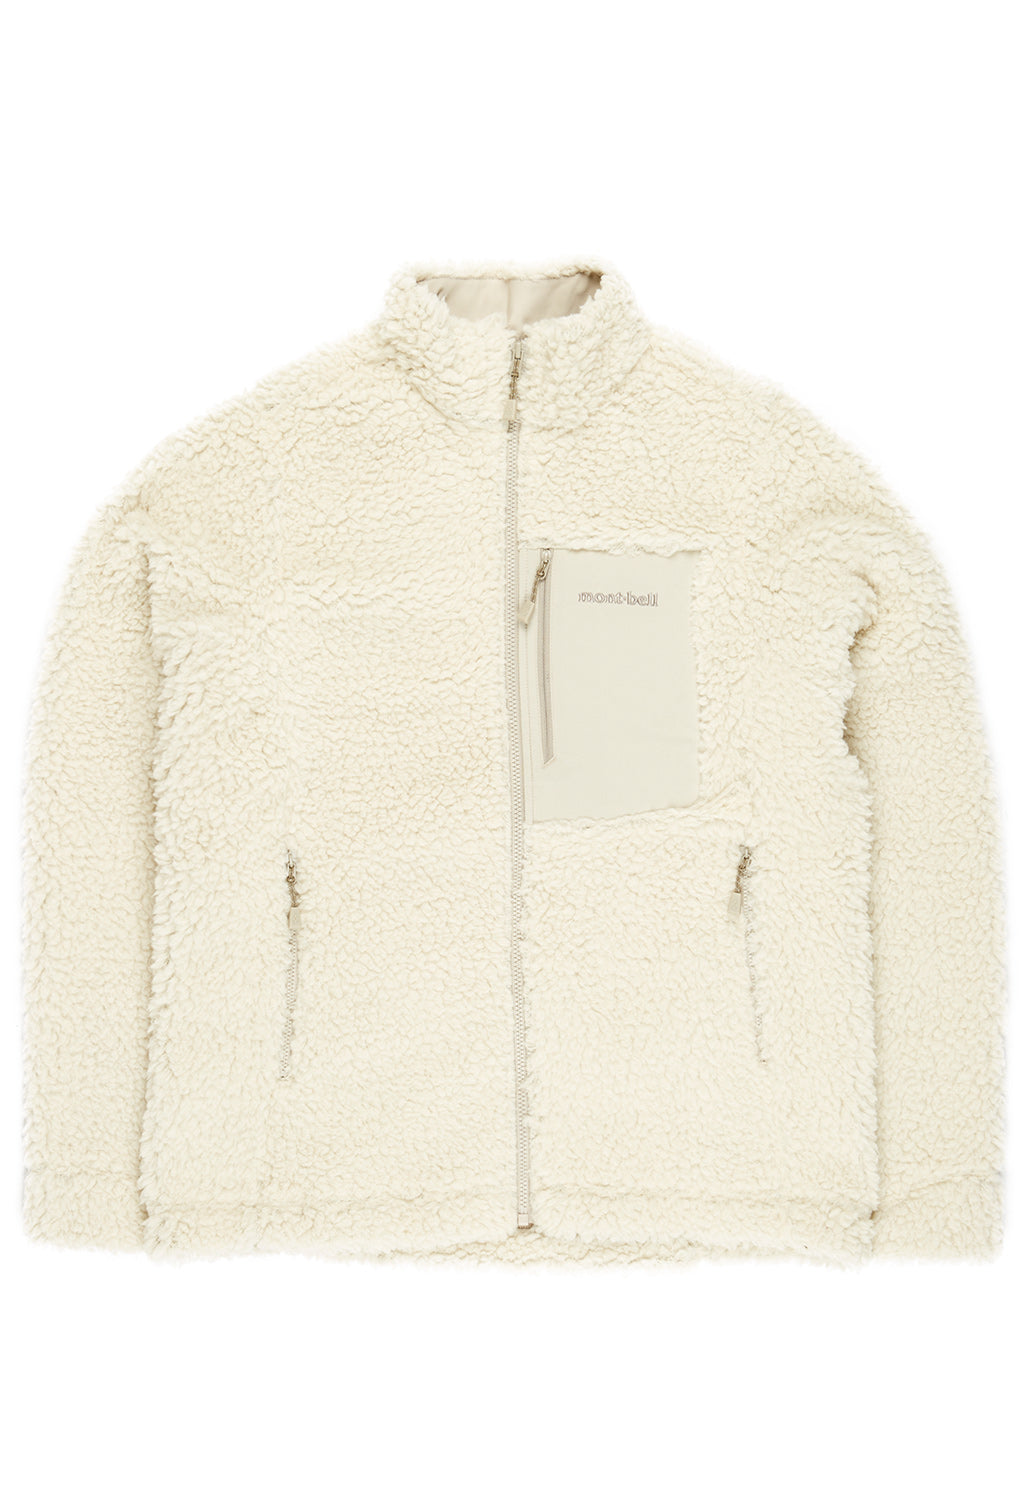 Montbell Women's Climaplus Shearling Jacket - Ivory